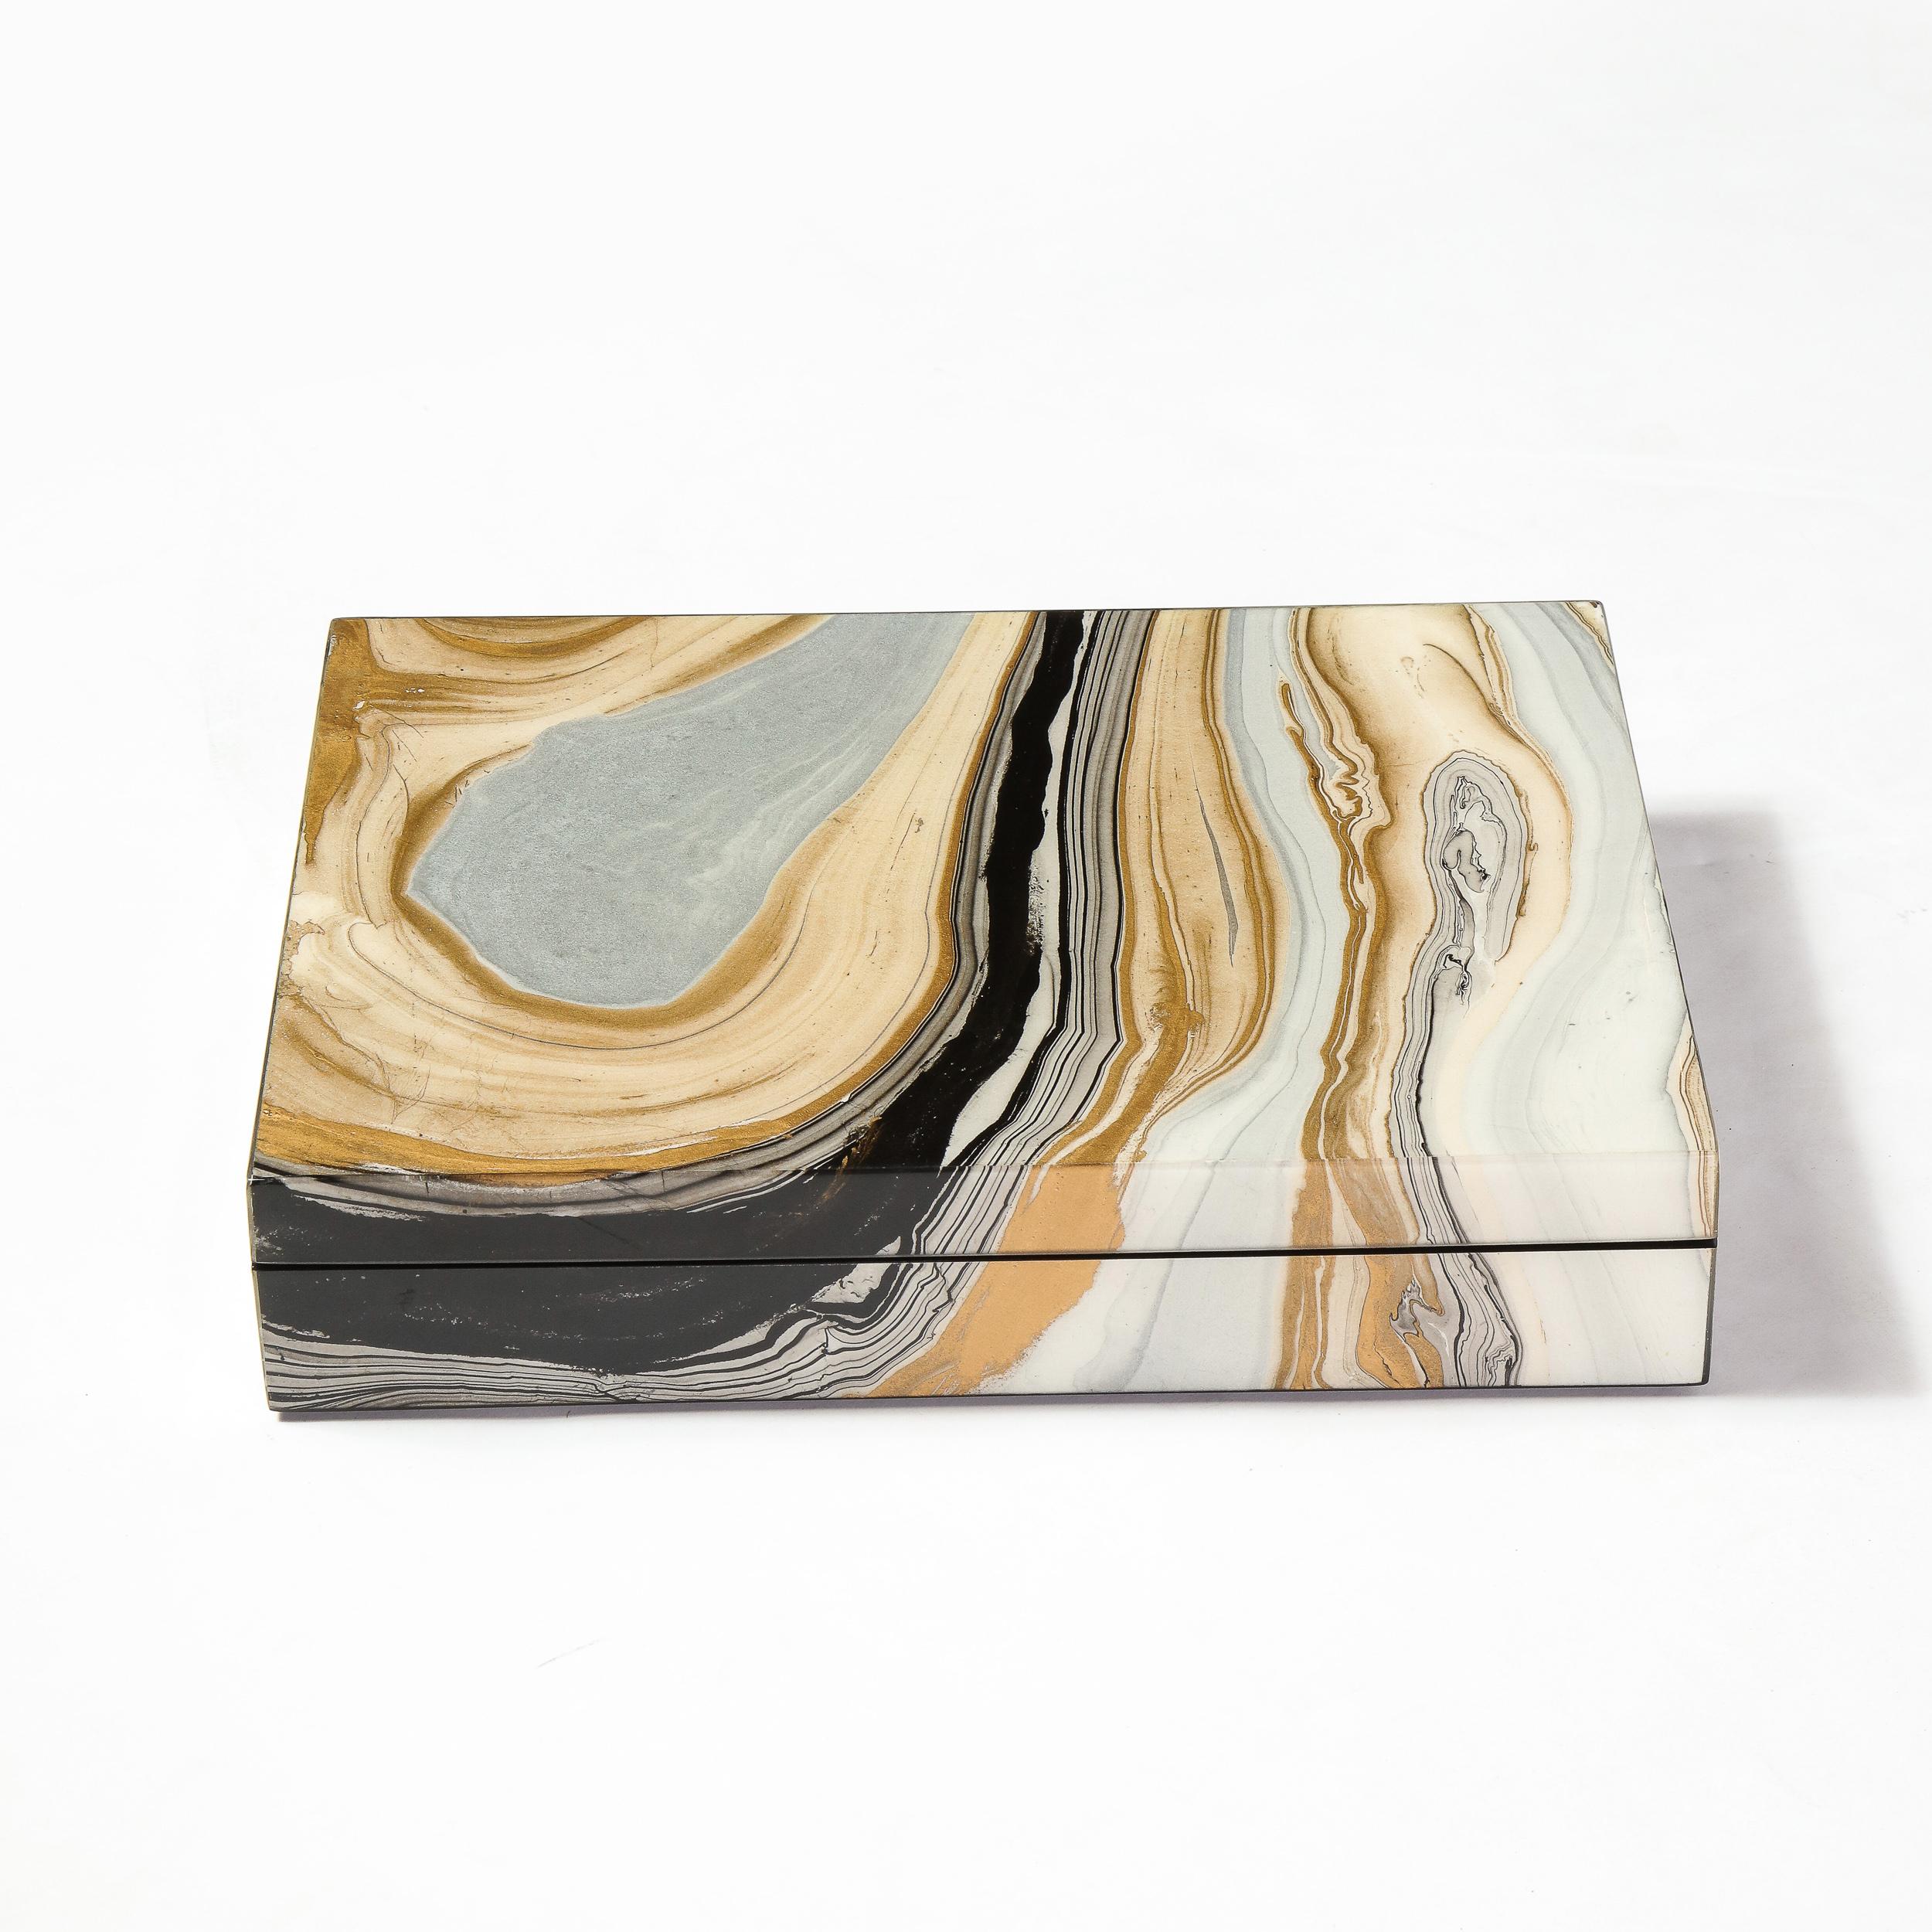 Contemporary Modernist Marbled Lacquer Rectangular Box with Felt Interior